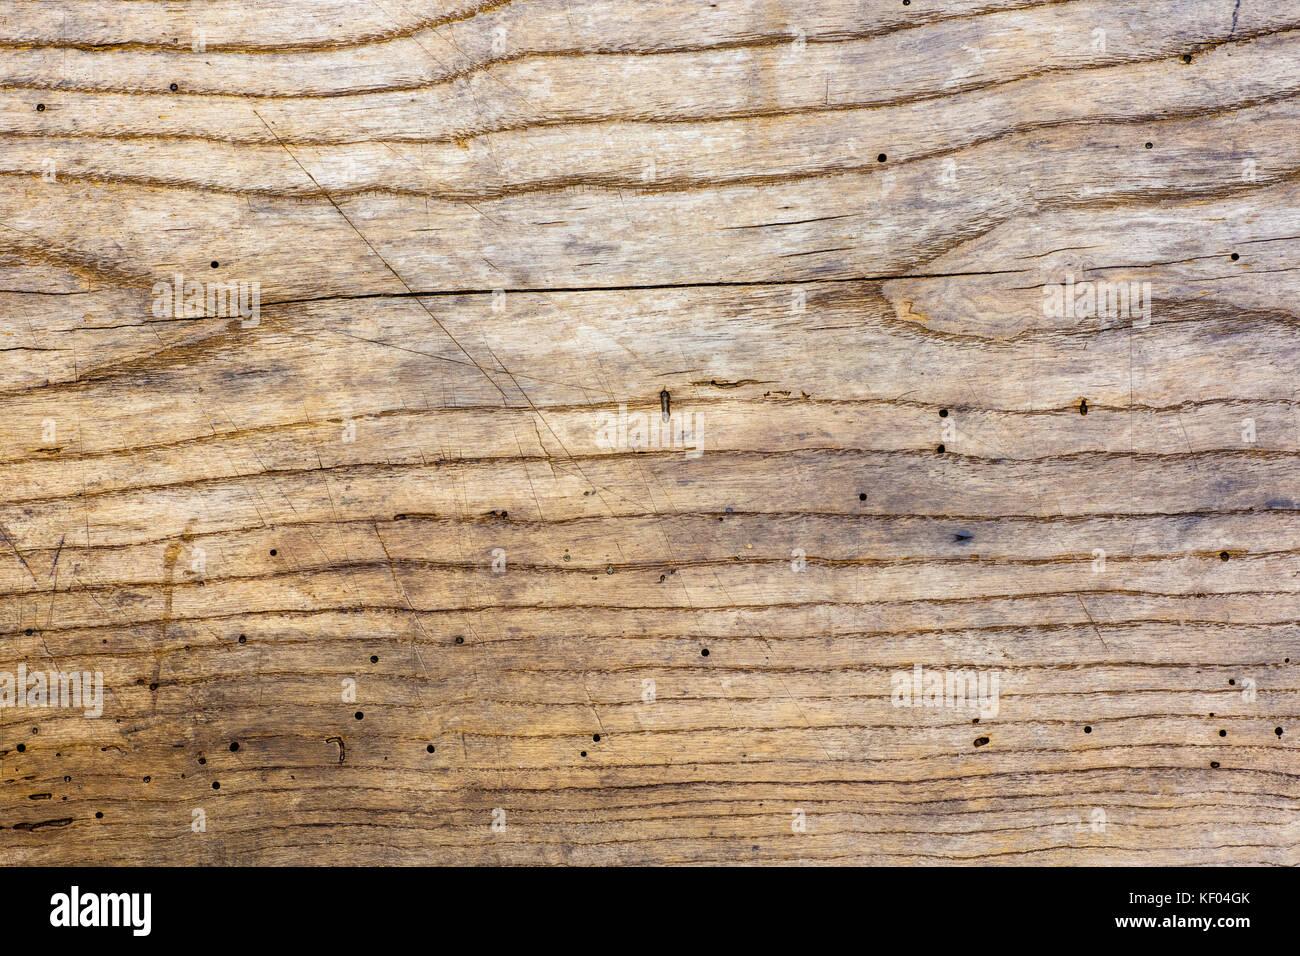 Photo of old oak wood texture with grooves and holes from the worm, suitable as a background Stock Photo